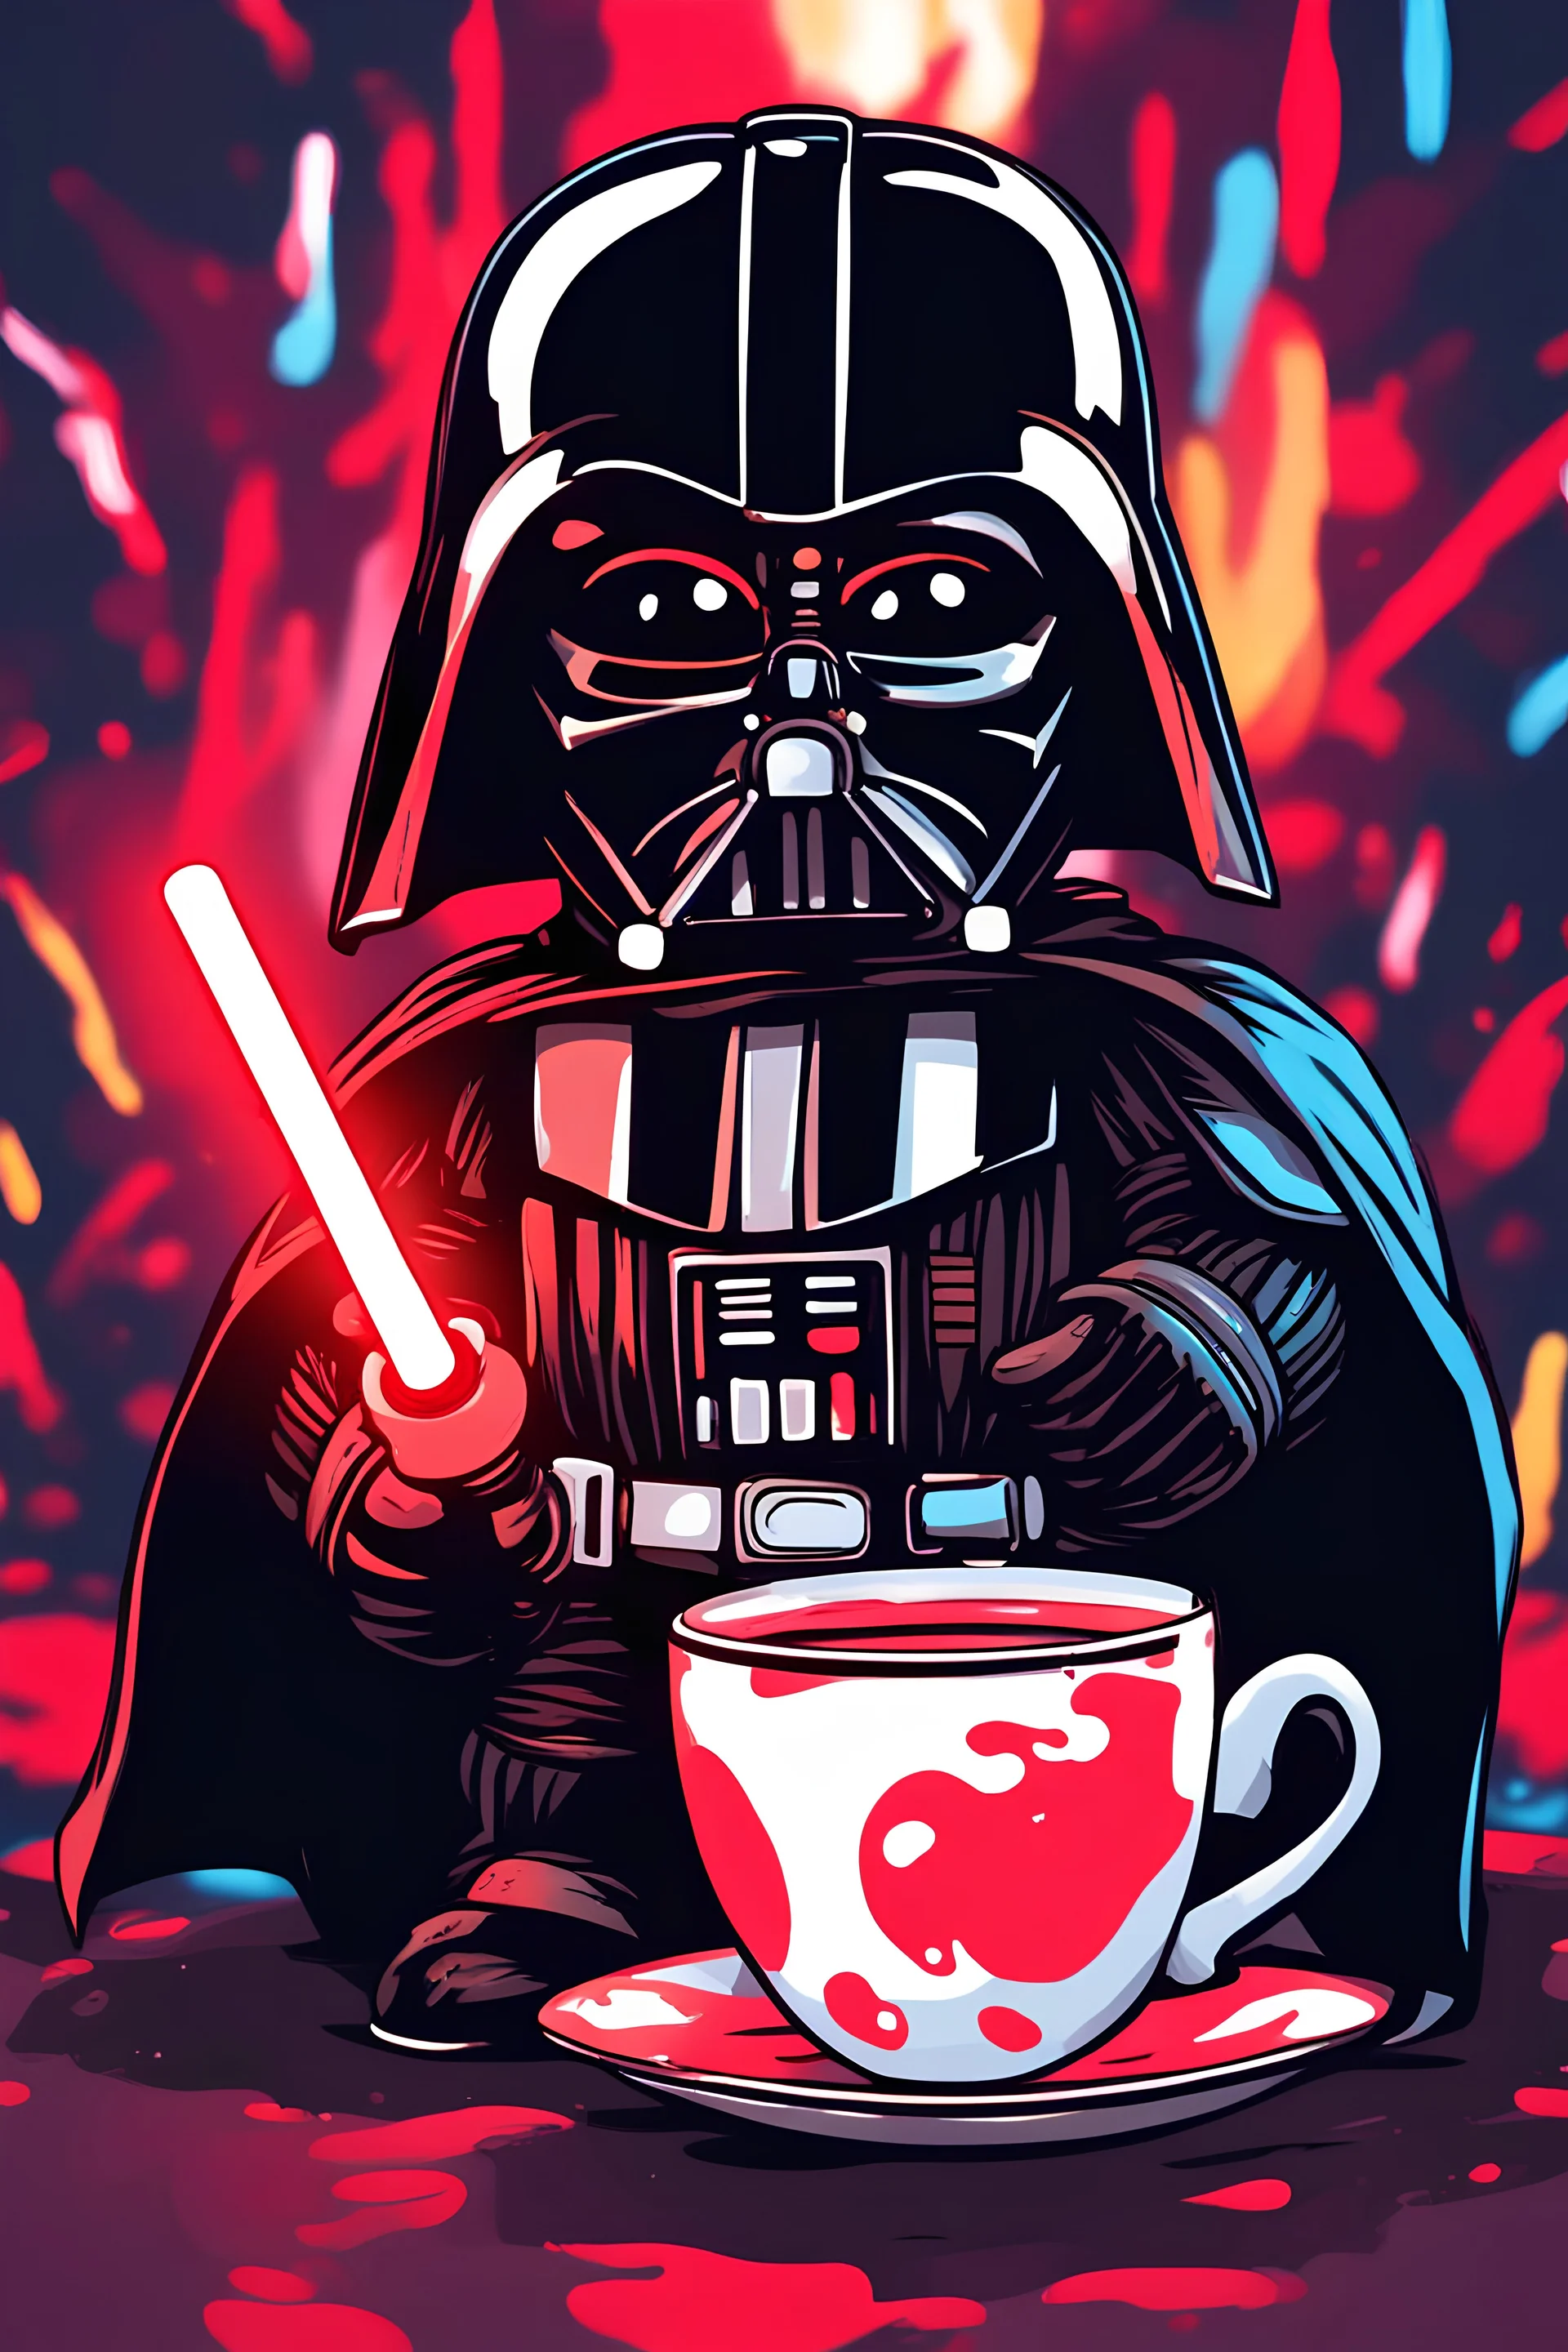 Tiny darth vader holding a red light saber, standing inside a coffee mug, neon colors, explosions background